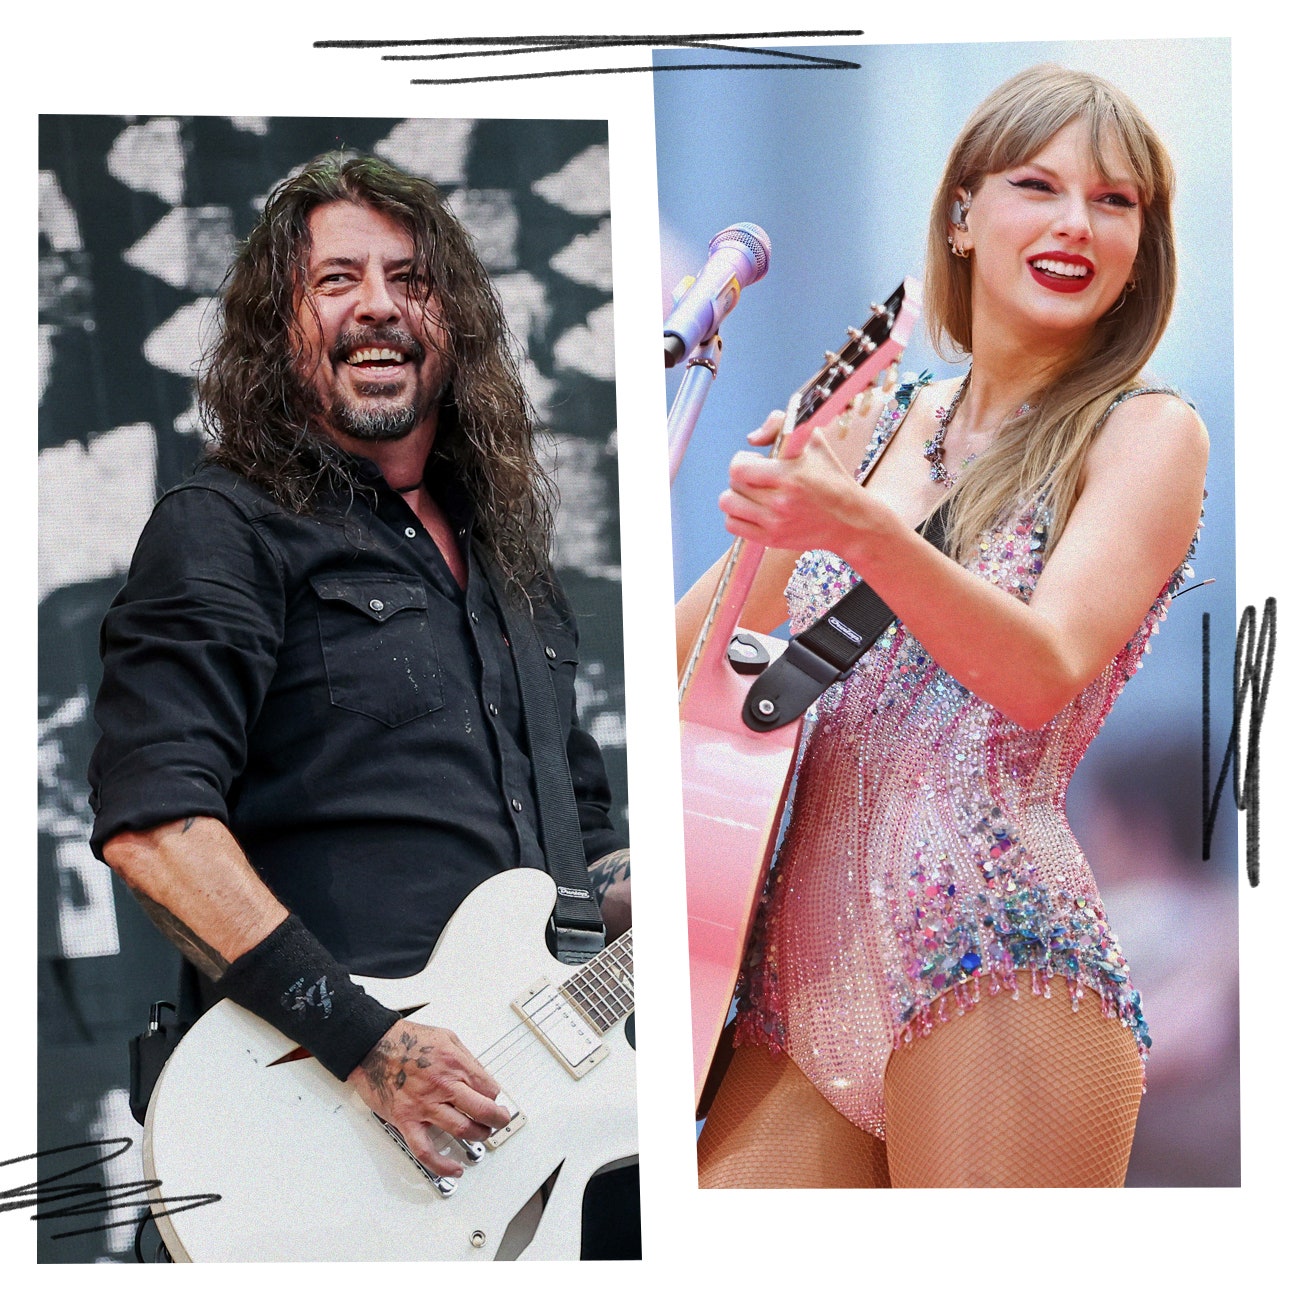 Dave Grohl Just Picked a (Foo) Fight With Taylor Swift: “We Actually Play Live”